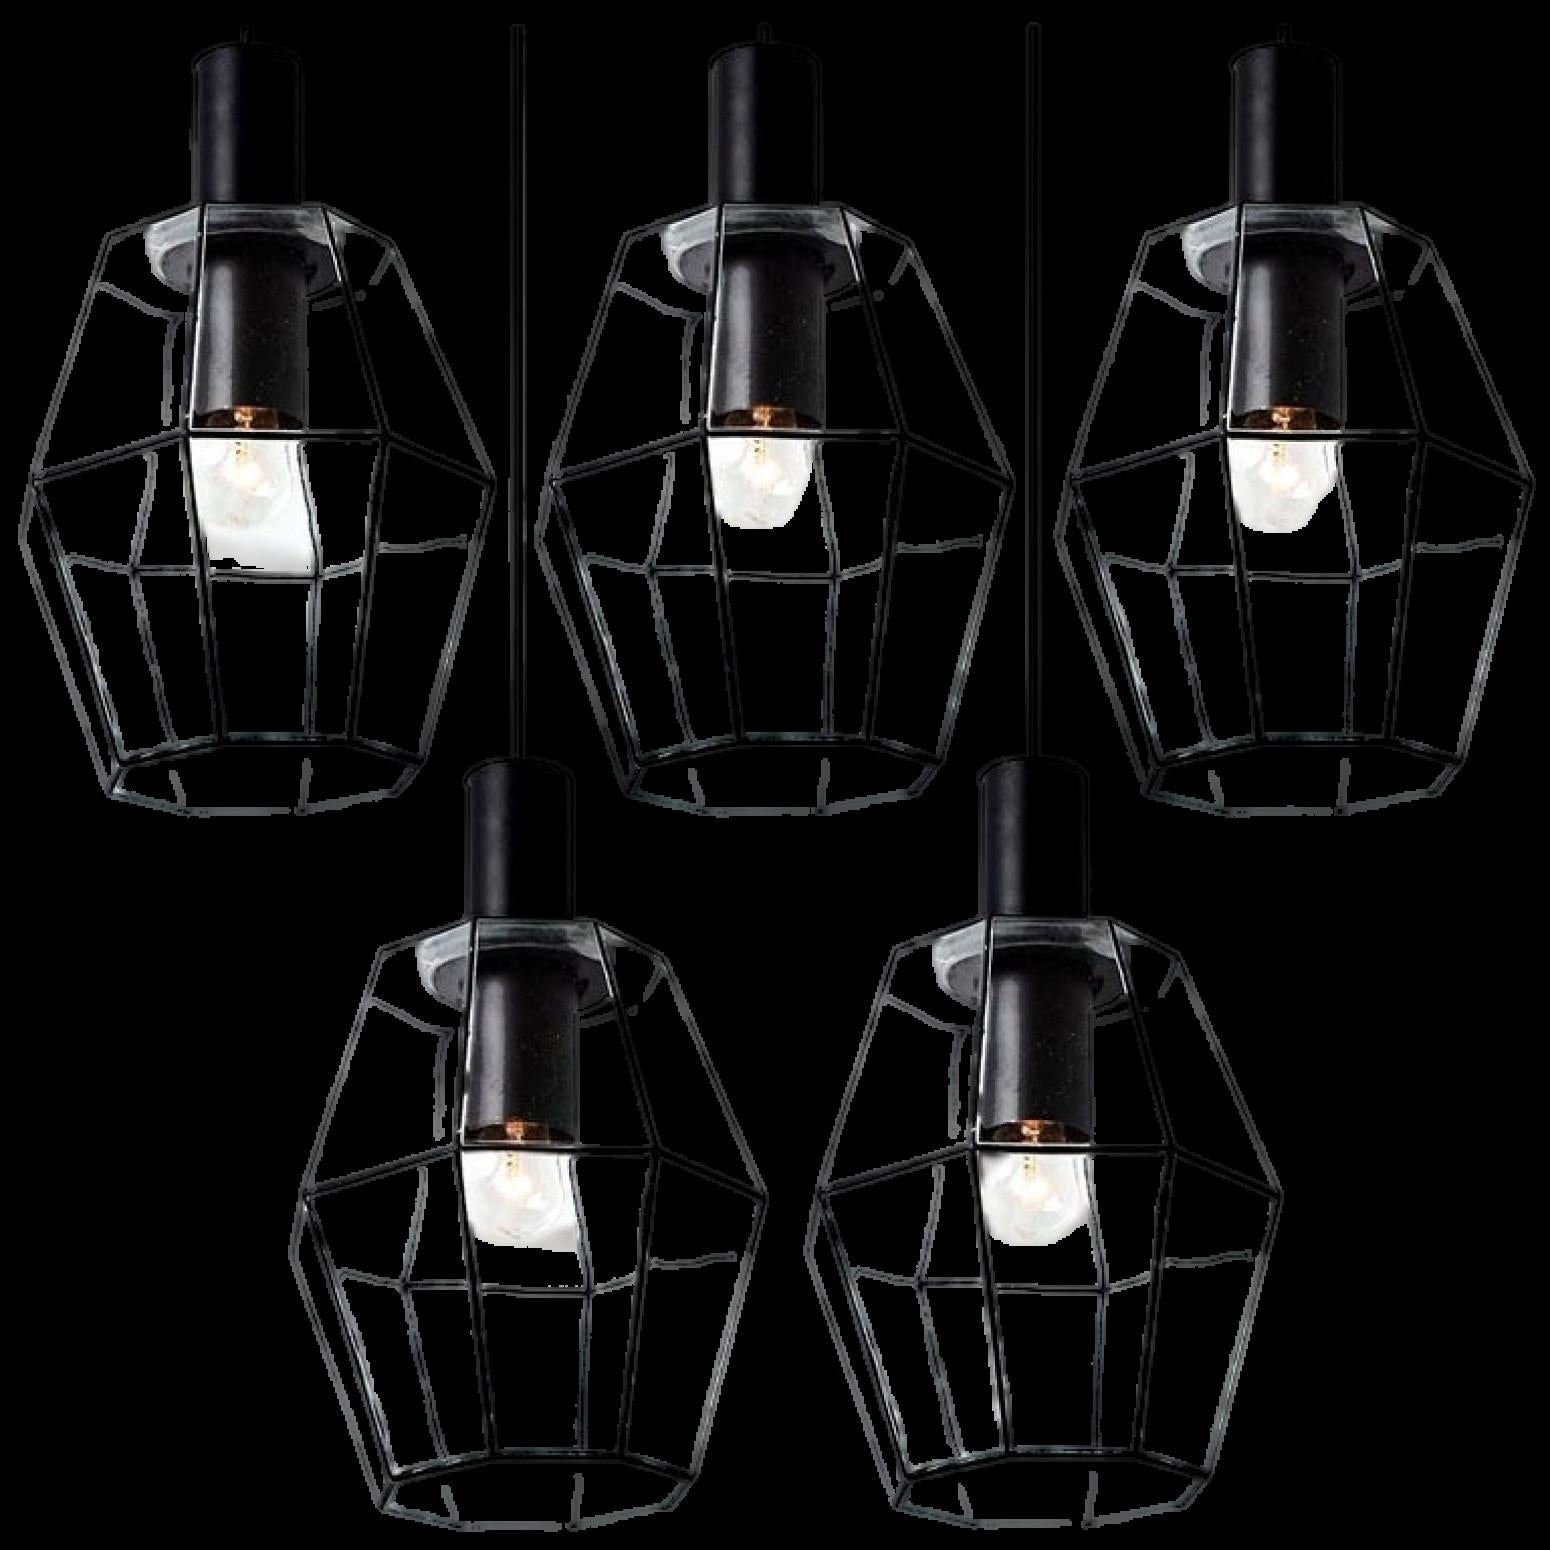 This set 12 of octagonal glass light fixtures were manufactured by Glashütte Limburg in Germany during the 1960s. Beautiful craftsmanship. Each lamp, made from elaborate clear glass with rectangular black accent elements.

Illuminates beautifully.